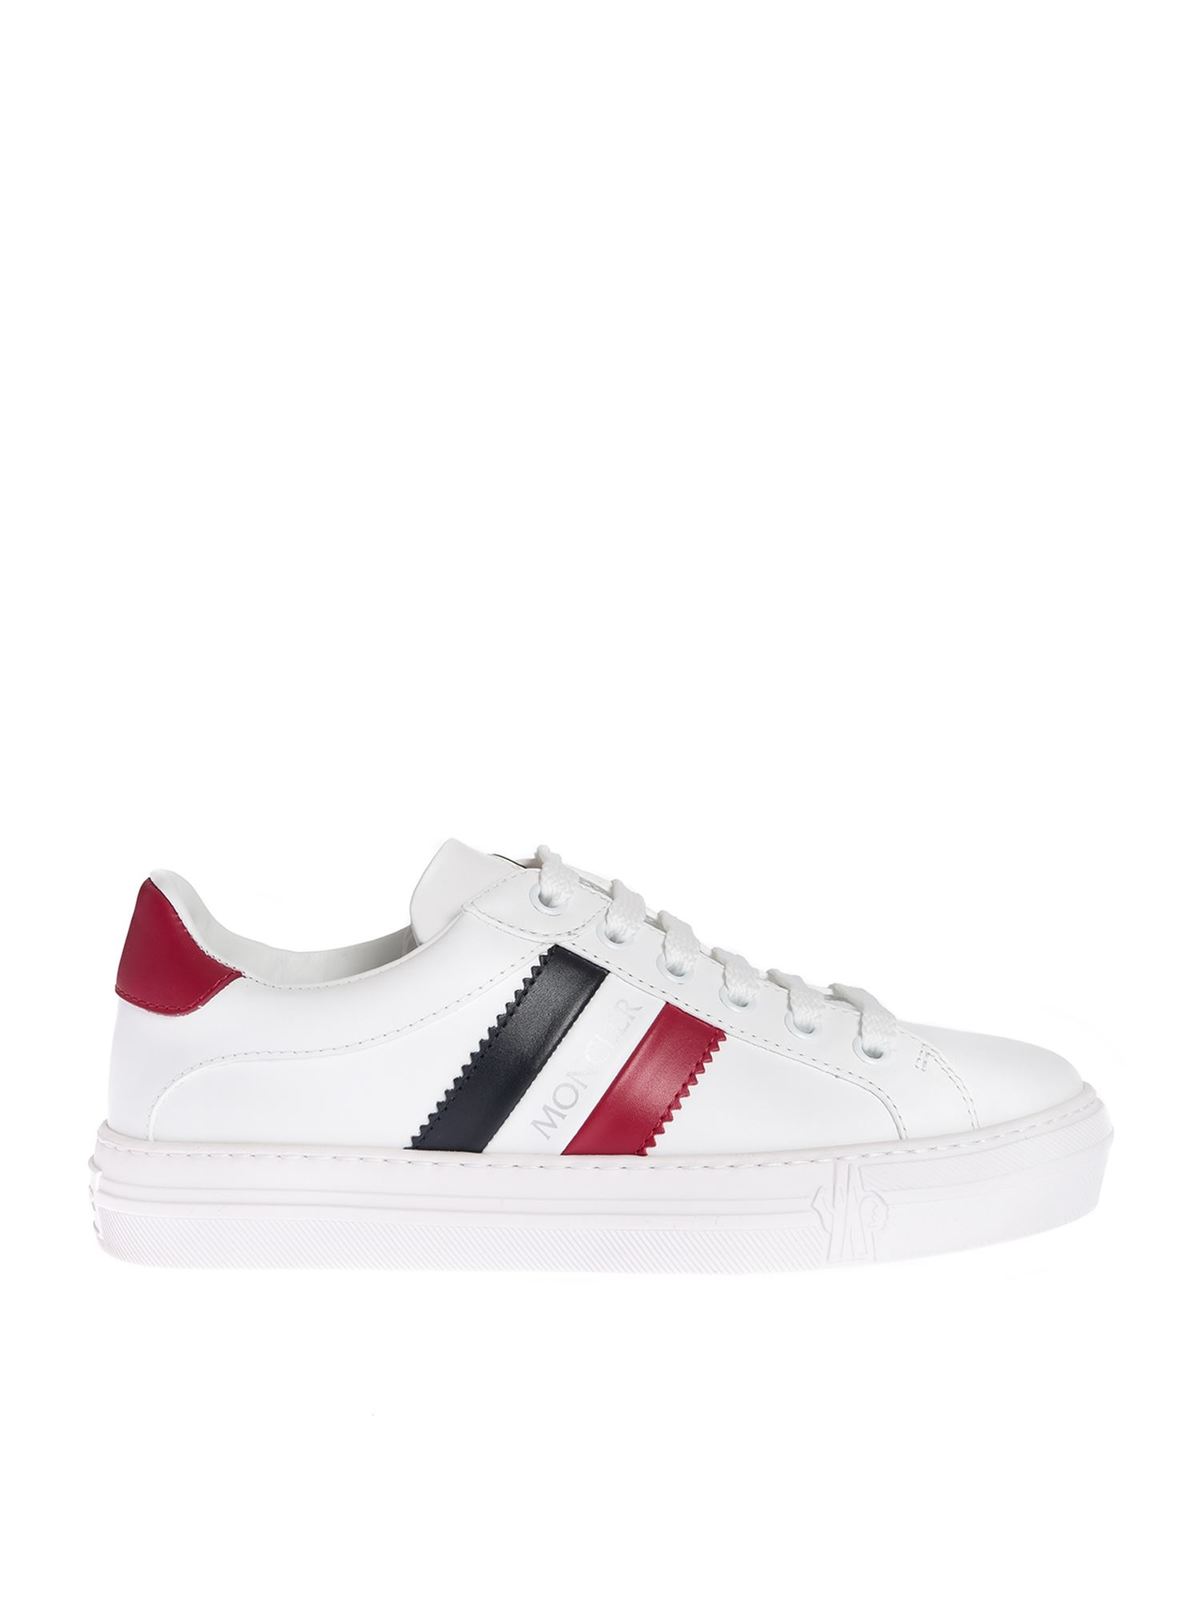 moncler shoes white